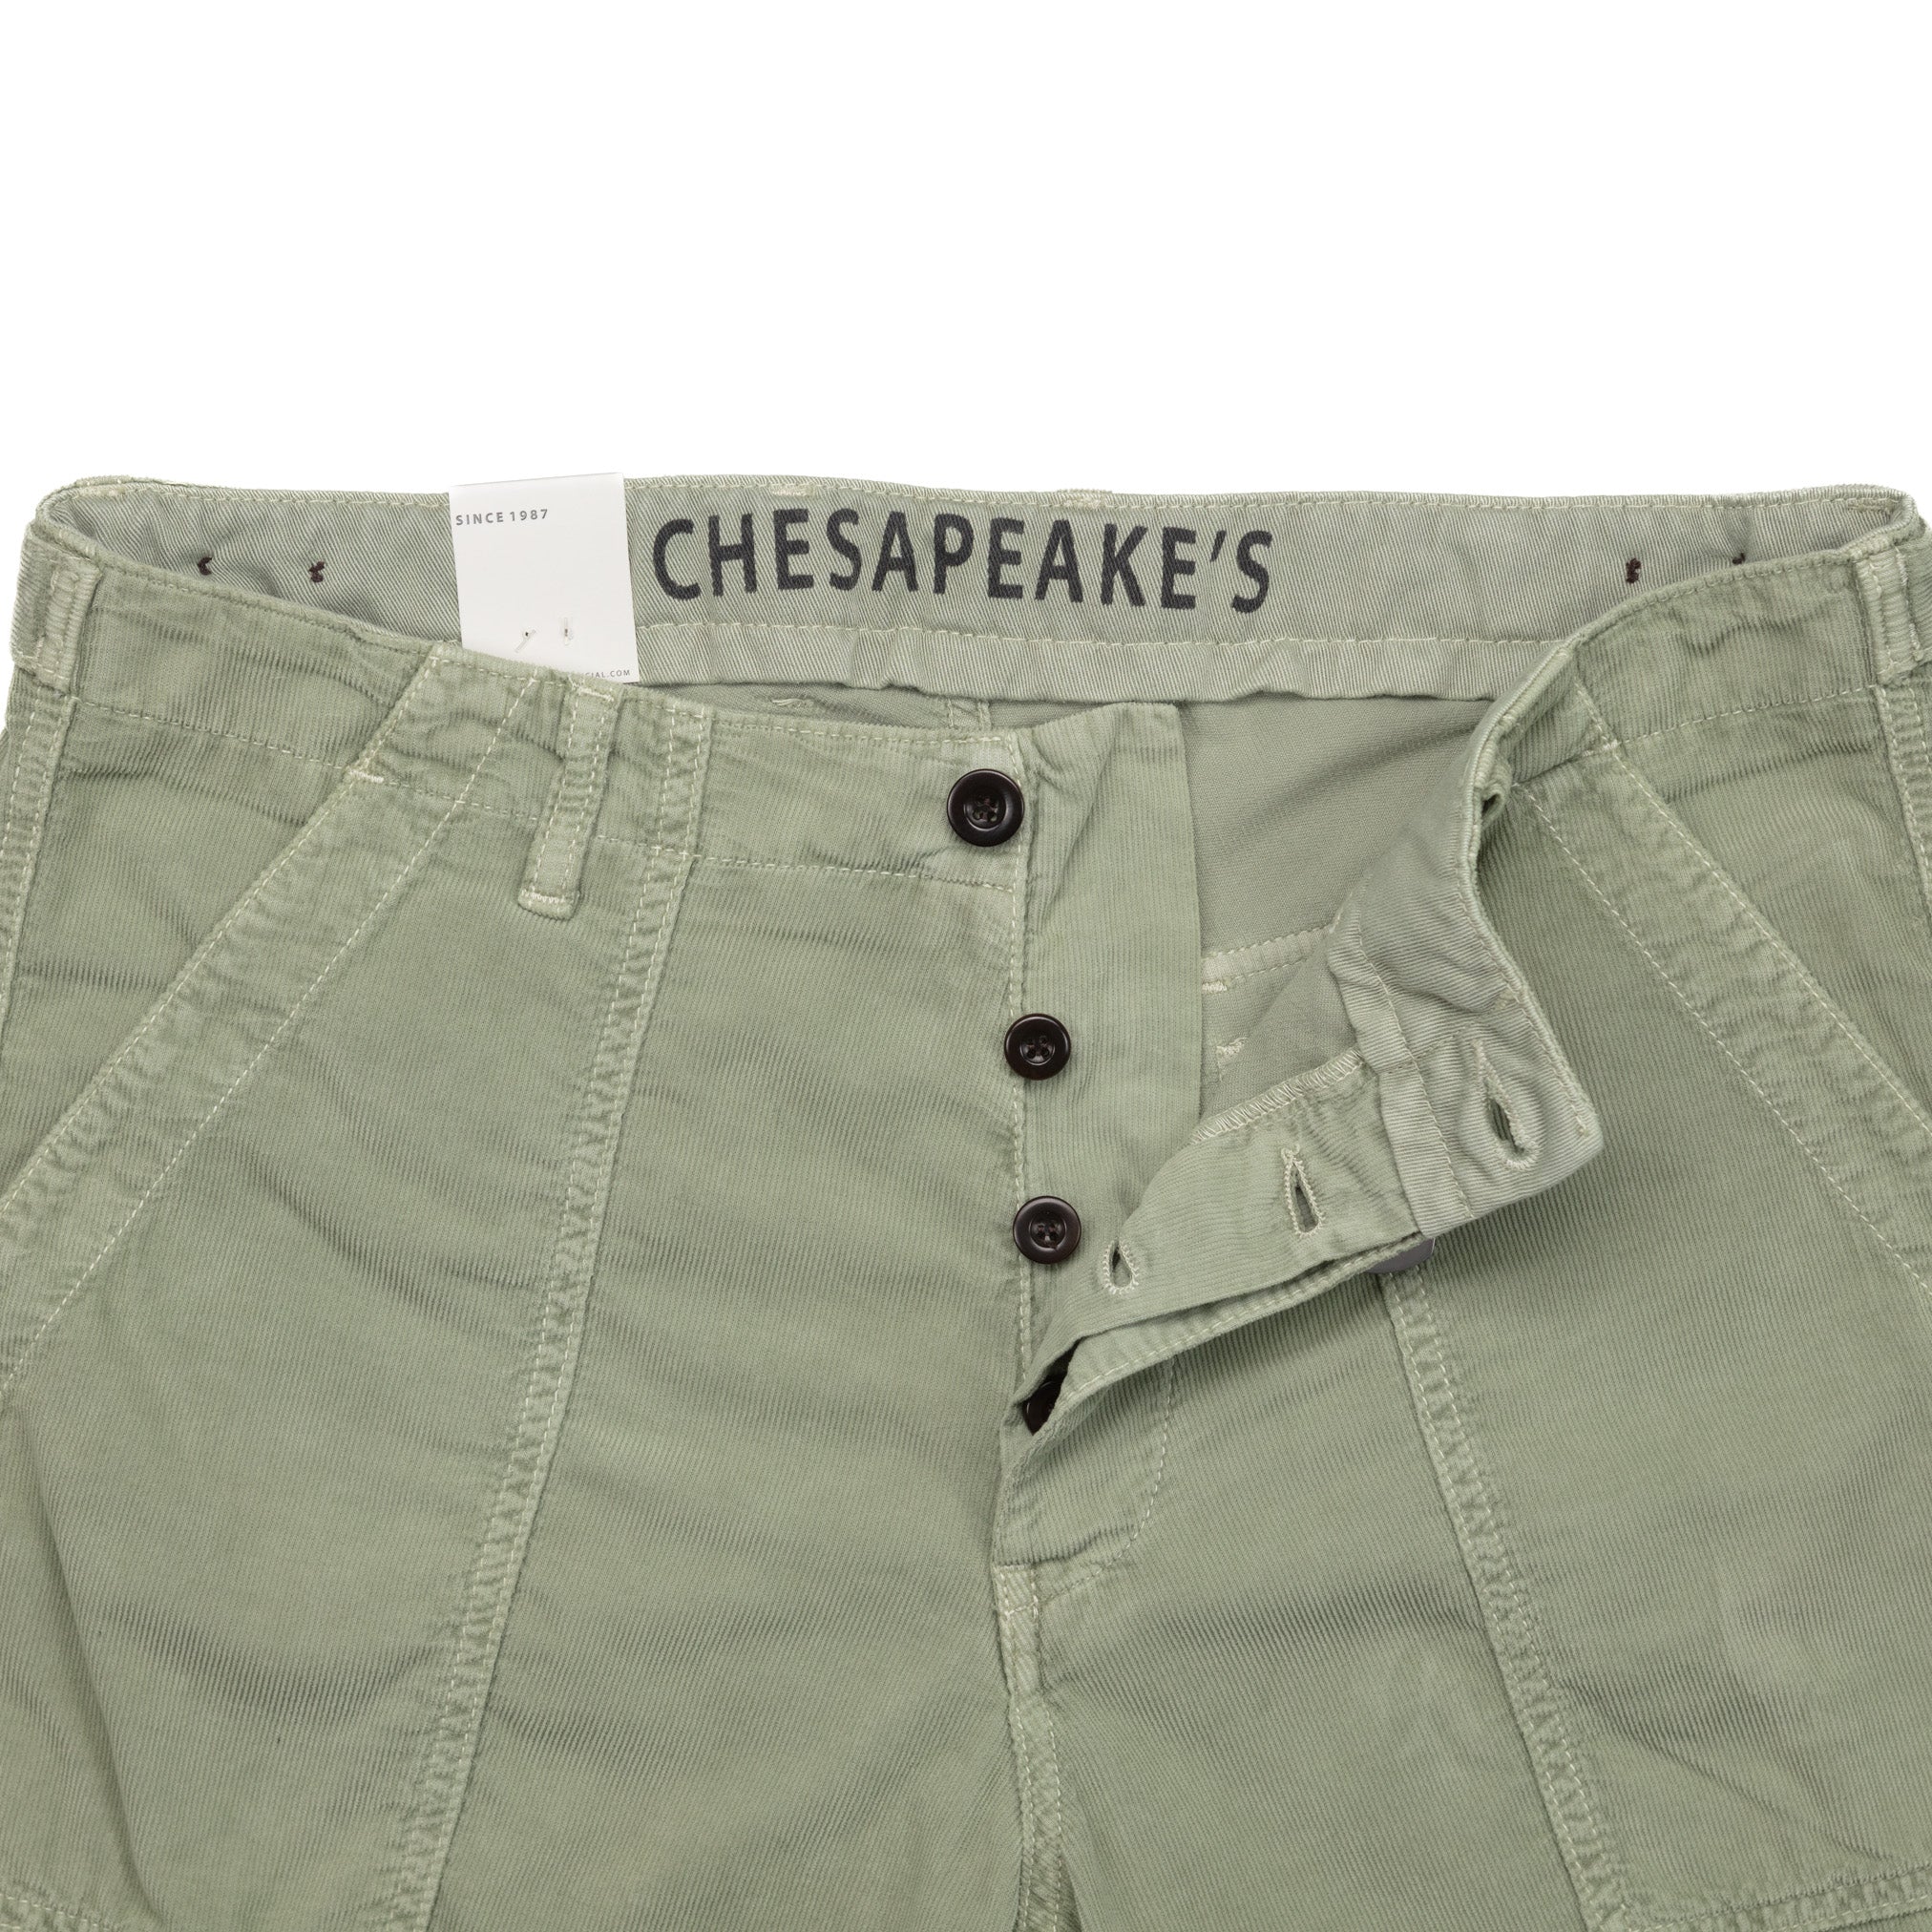 Shannon Fatigue Shorts in Sage Cord